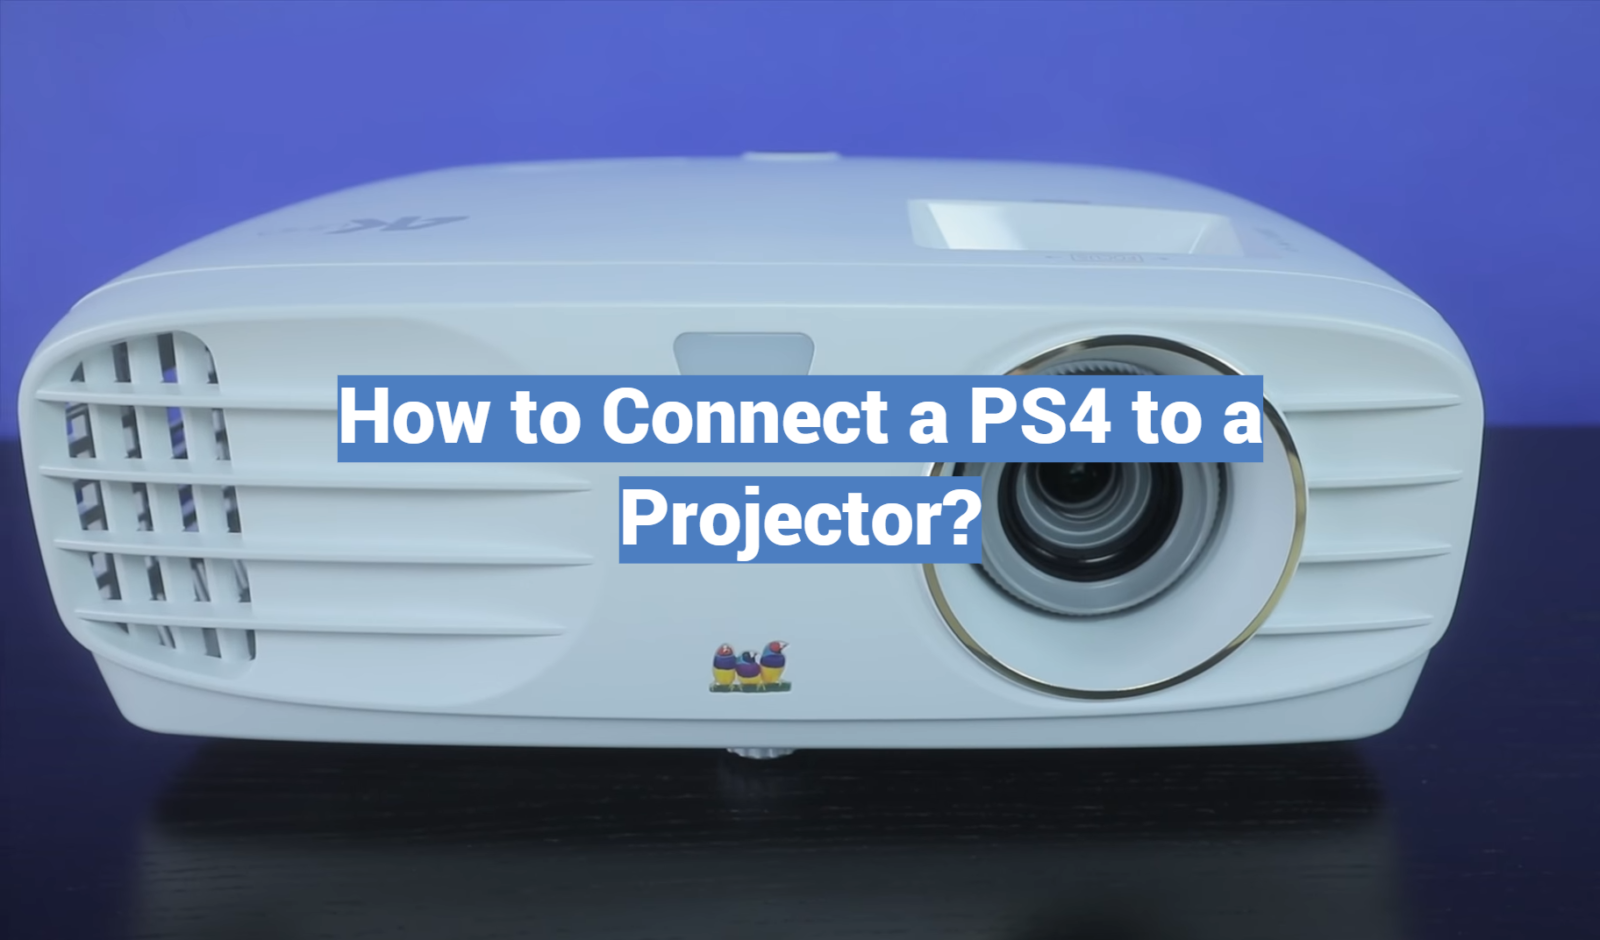 How to Connect a PS4 to a Projector?